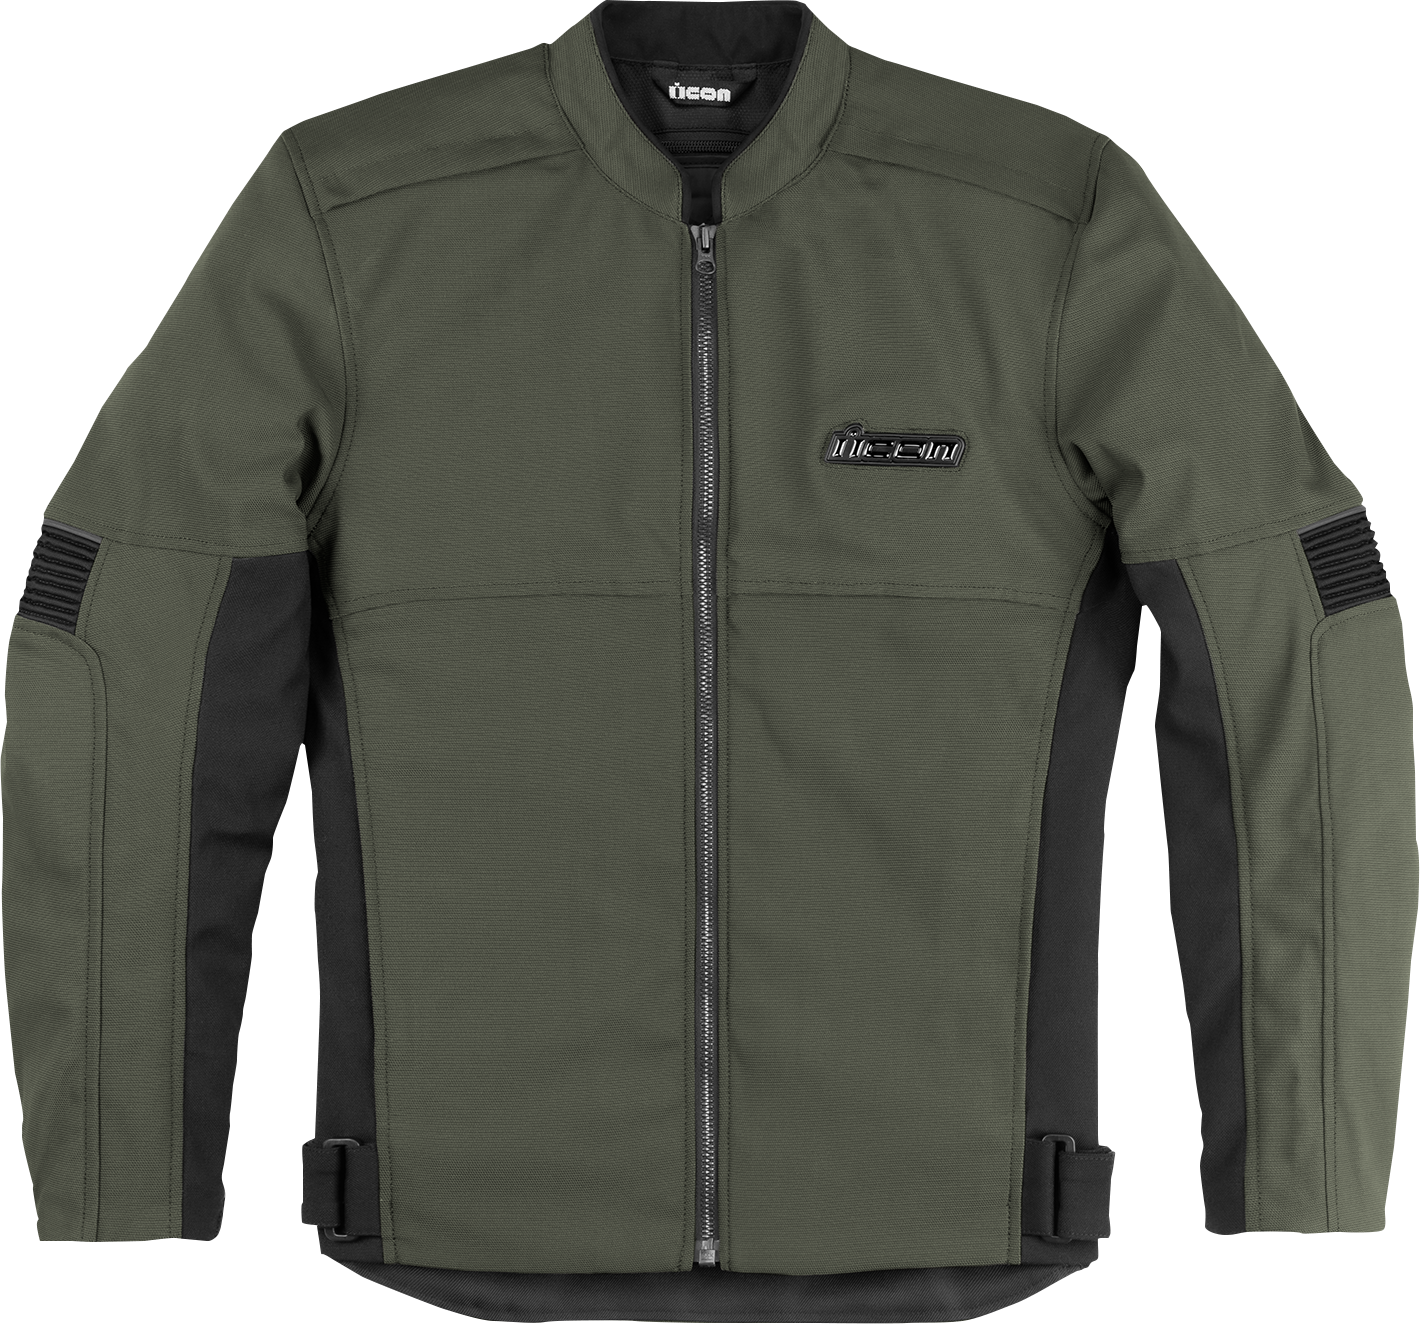 ICON Slabtown Jacket - Green - Small 2820-6261